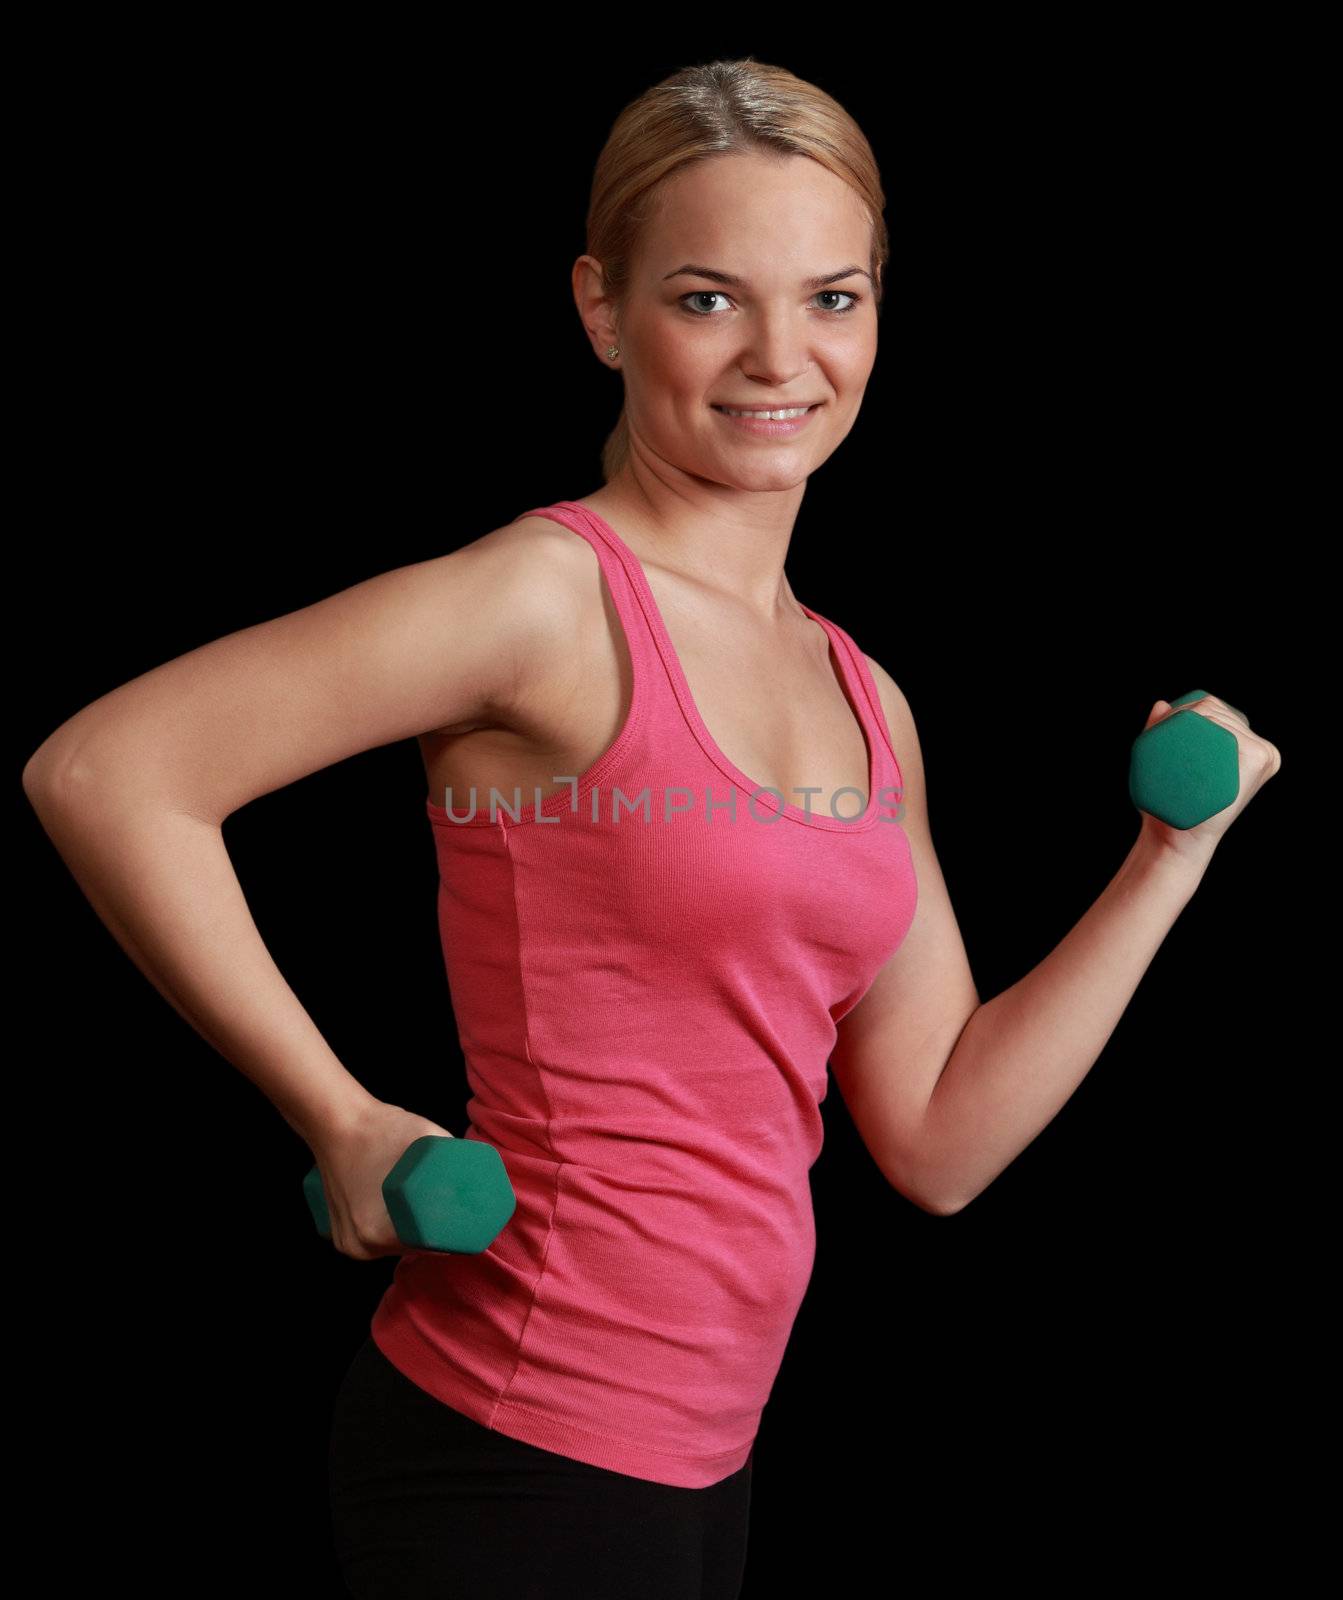 Woman with Dumbbells by RazvanPhotography